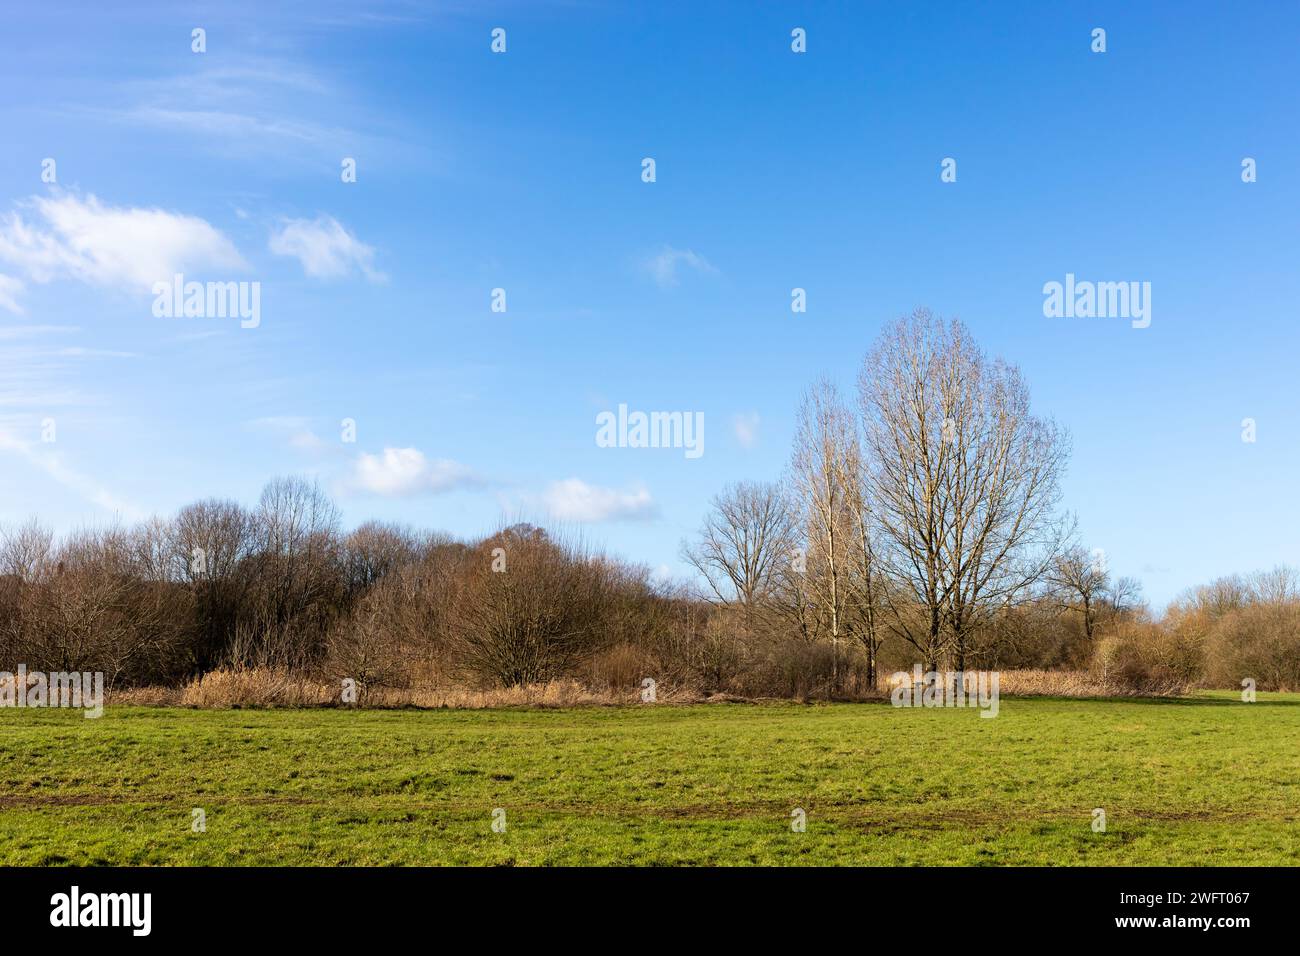 View of trees and a field in Blandford Forum, Dorset, England in winter. Stock Photo